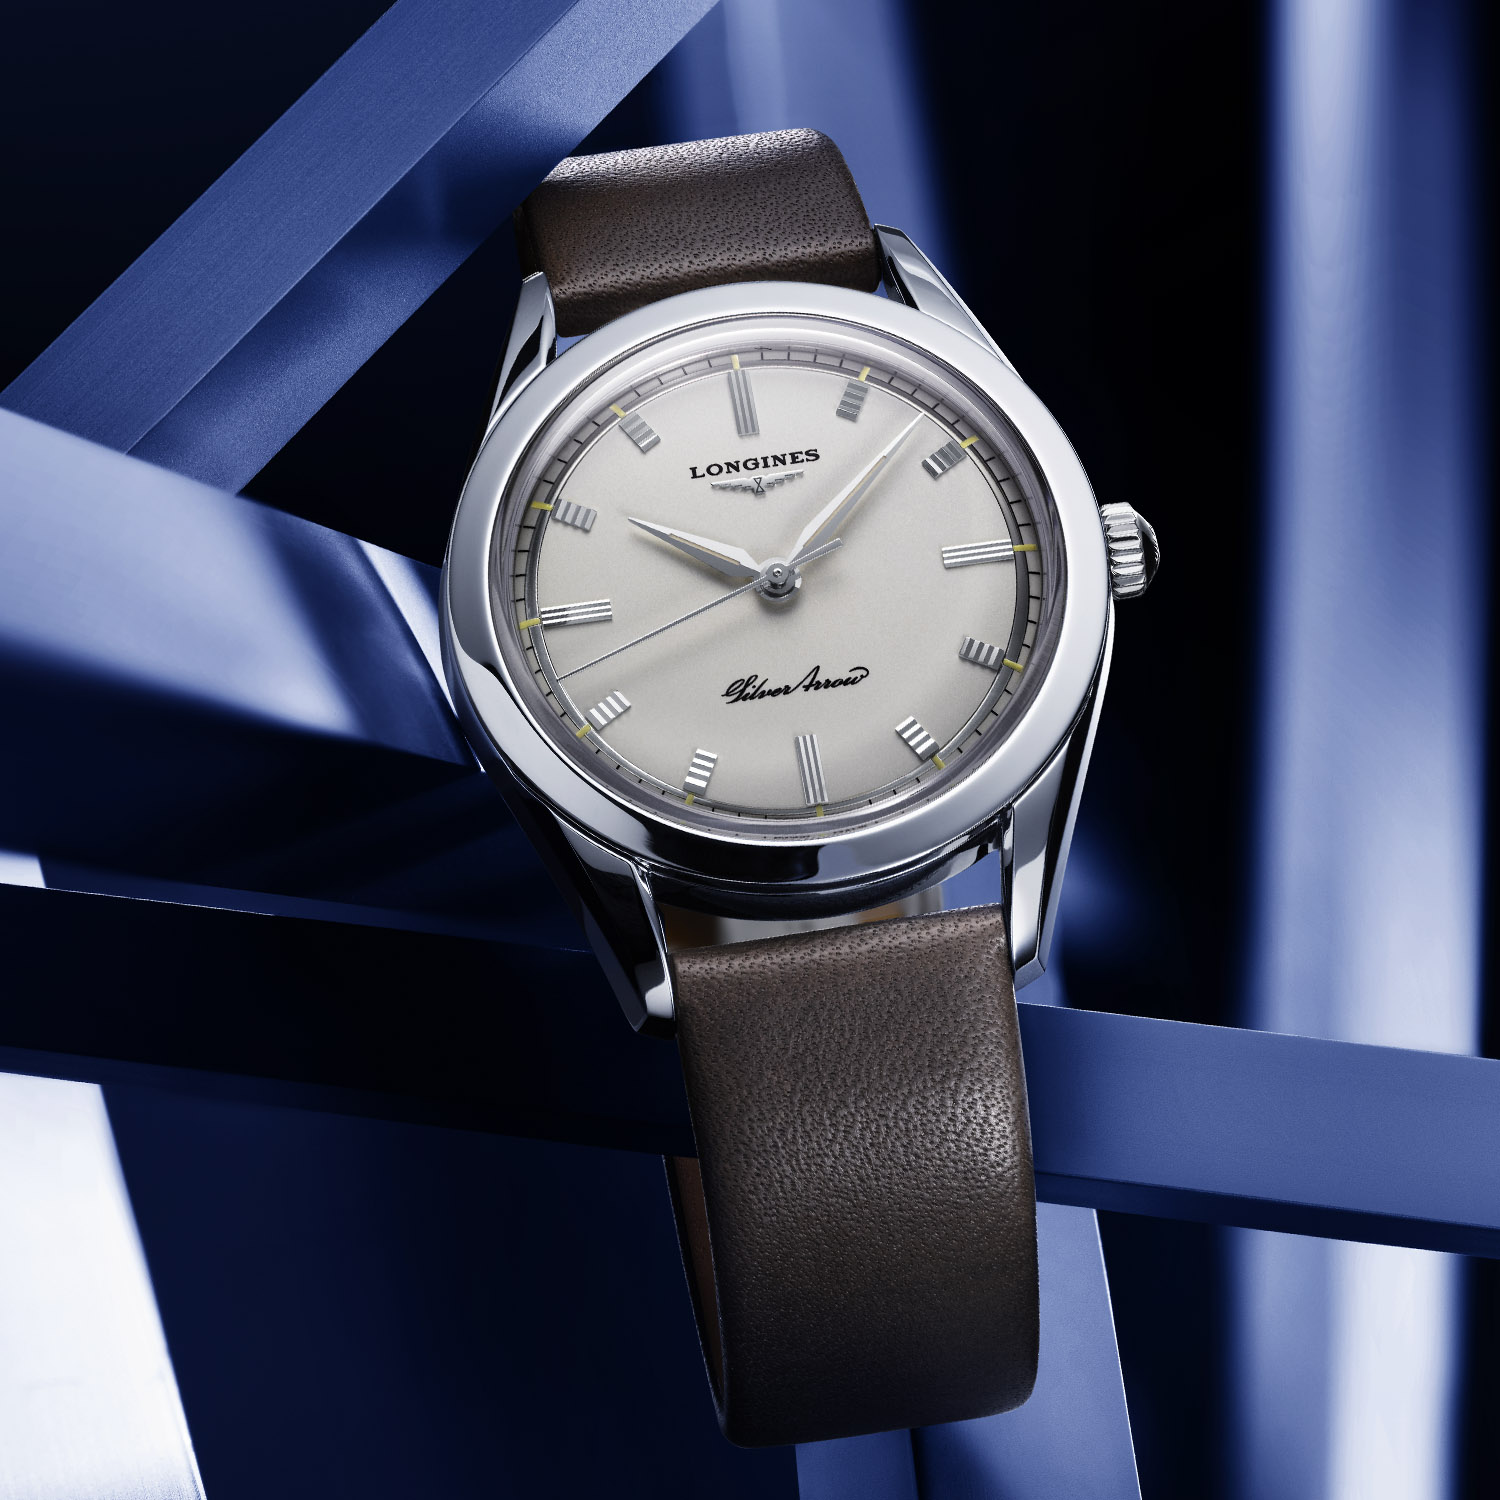 INTRODUCING: The Longines Silver Arrow is the watch that Don Draper would wear to the race track